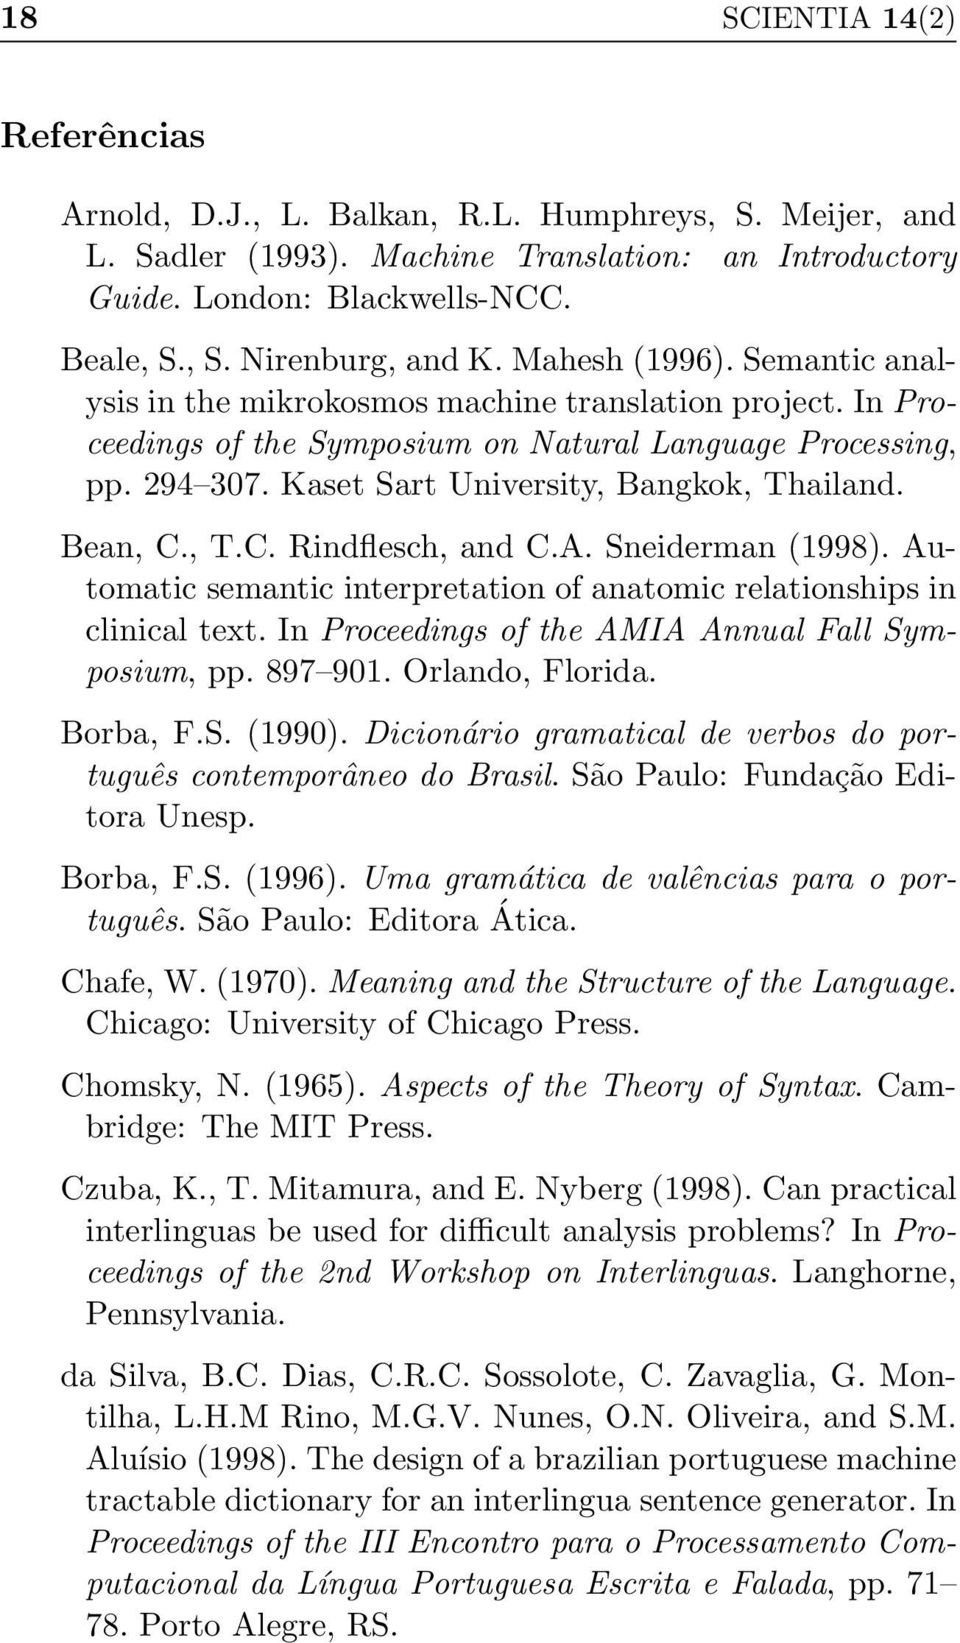 Bean, C., T.C. Rindflesch, and C.A. Sneiderman (1998). Automatic semantic interpretation of anatomic relationships in clinical text. In Proceedings of the AMIA Annual Fall Symposium, pp. 897 901.